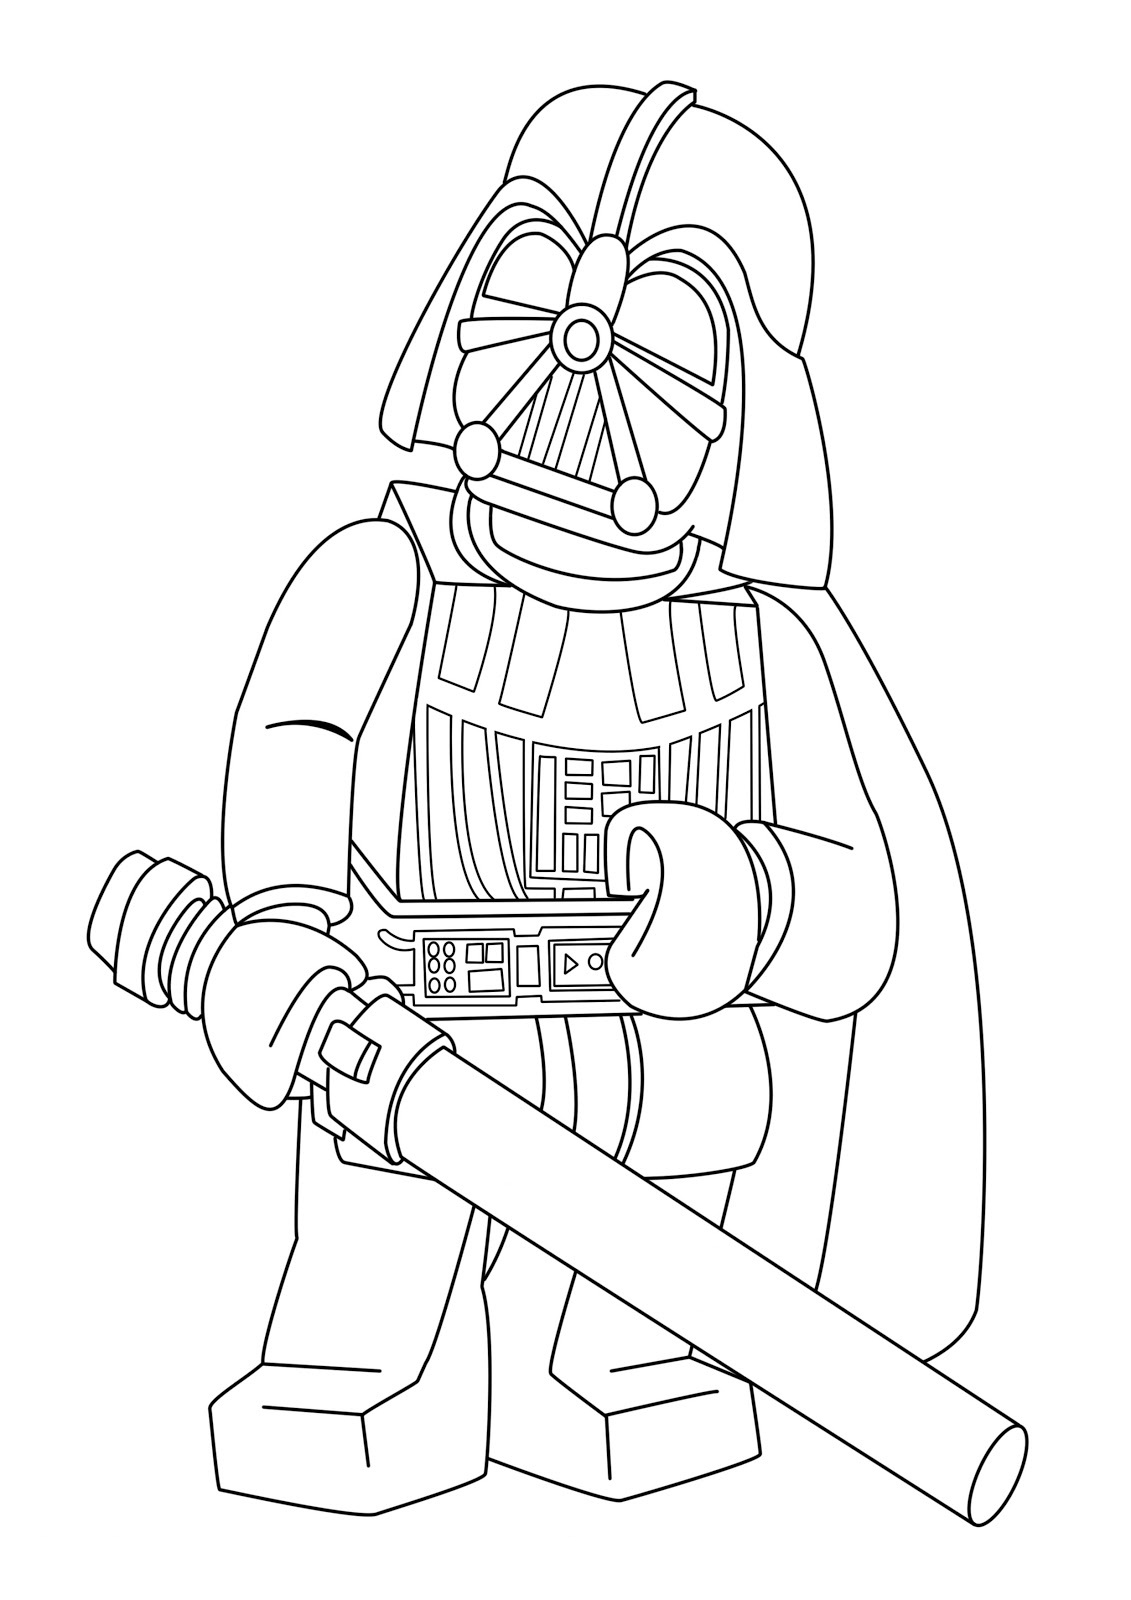  Lego Star Wars coloring pages | coloring pages for boys | #10